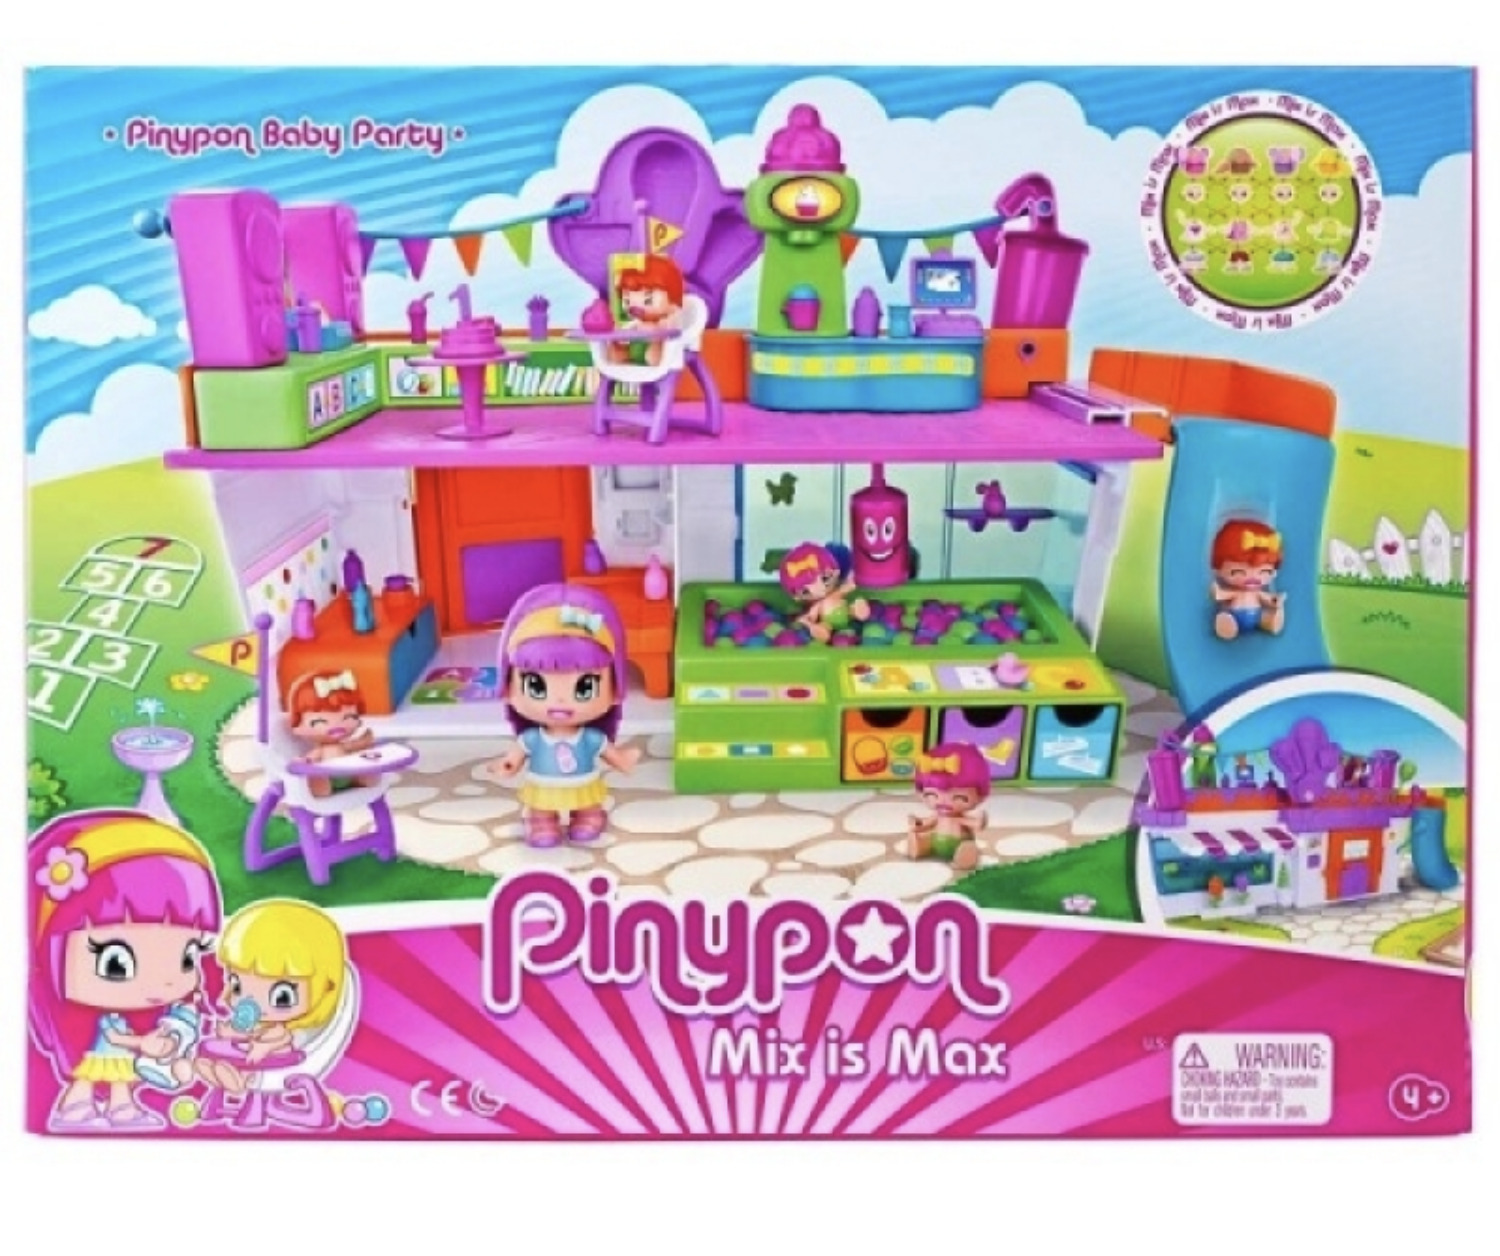 Pinypon Little Baby Party Child Includes 2 Figures And Pin Pon New